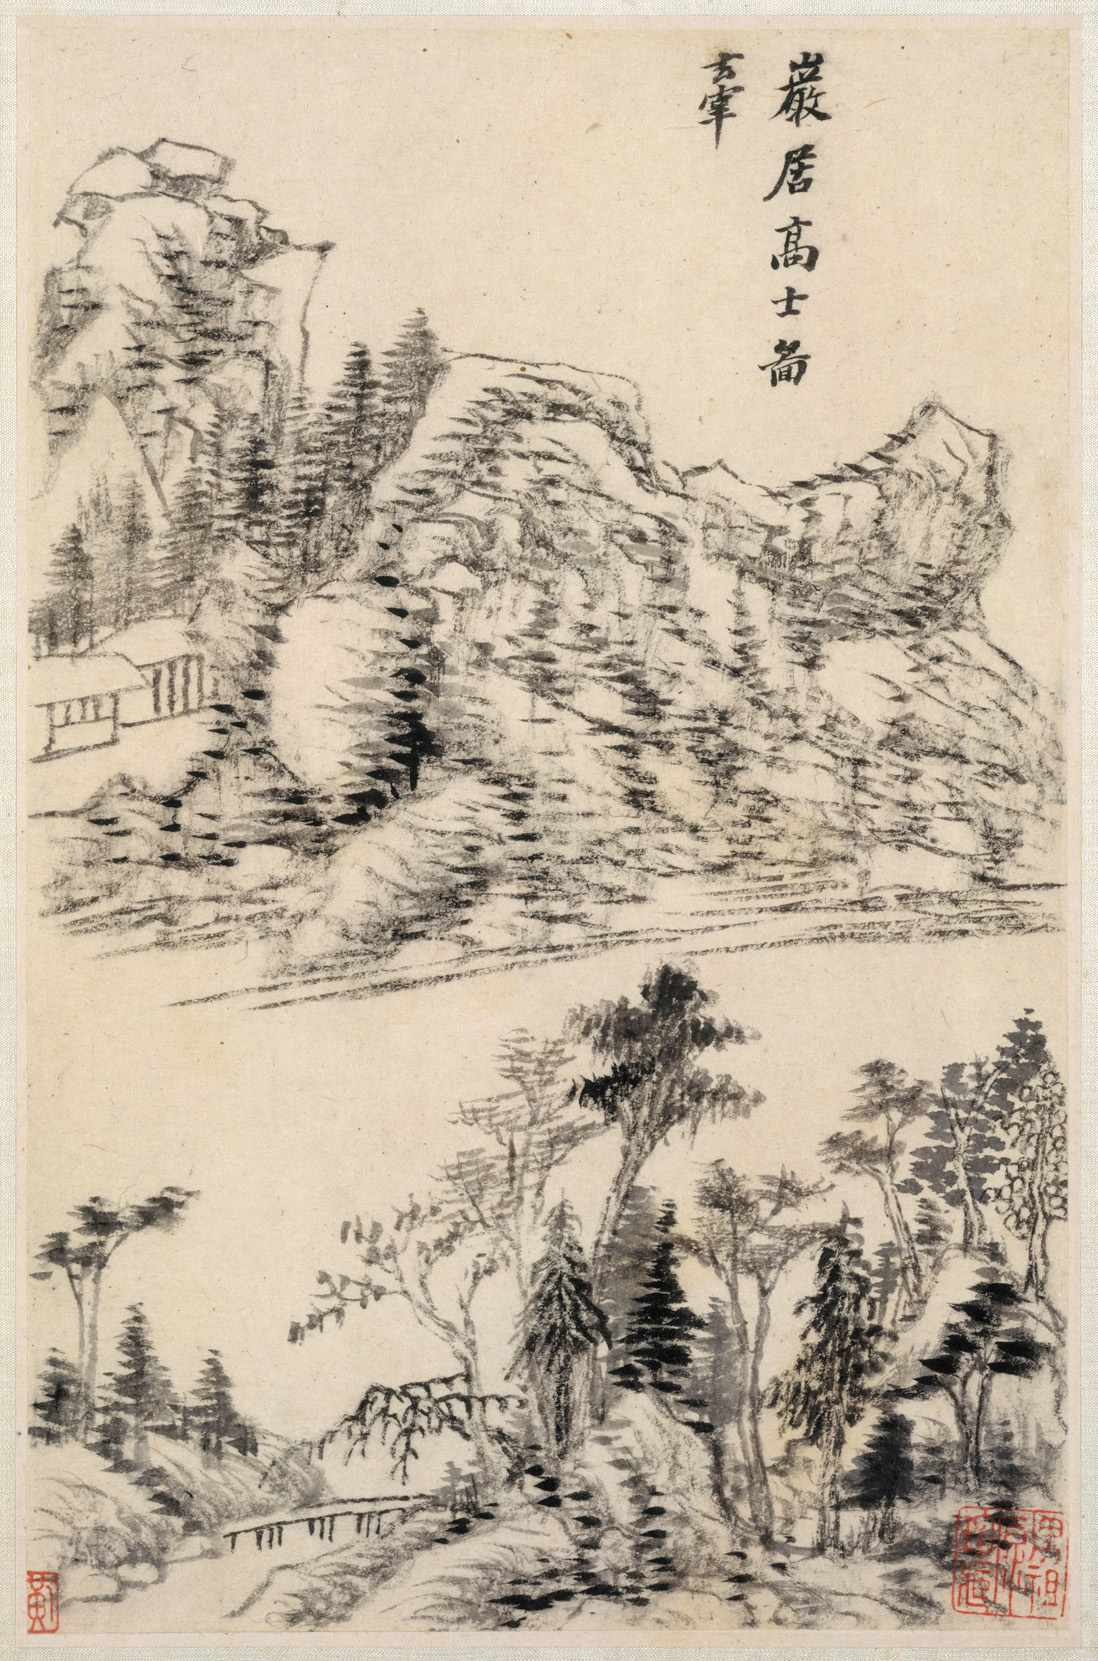 Dong Qichang, Landscapes of old masters